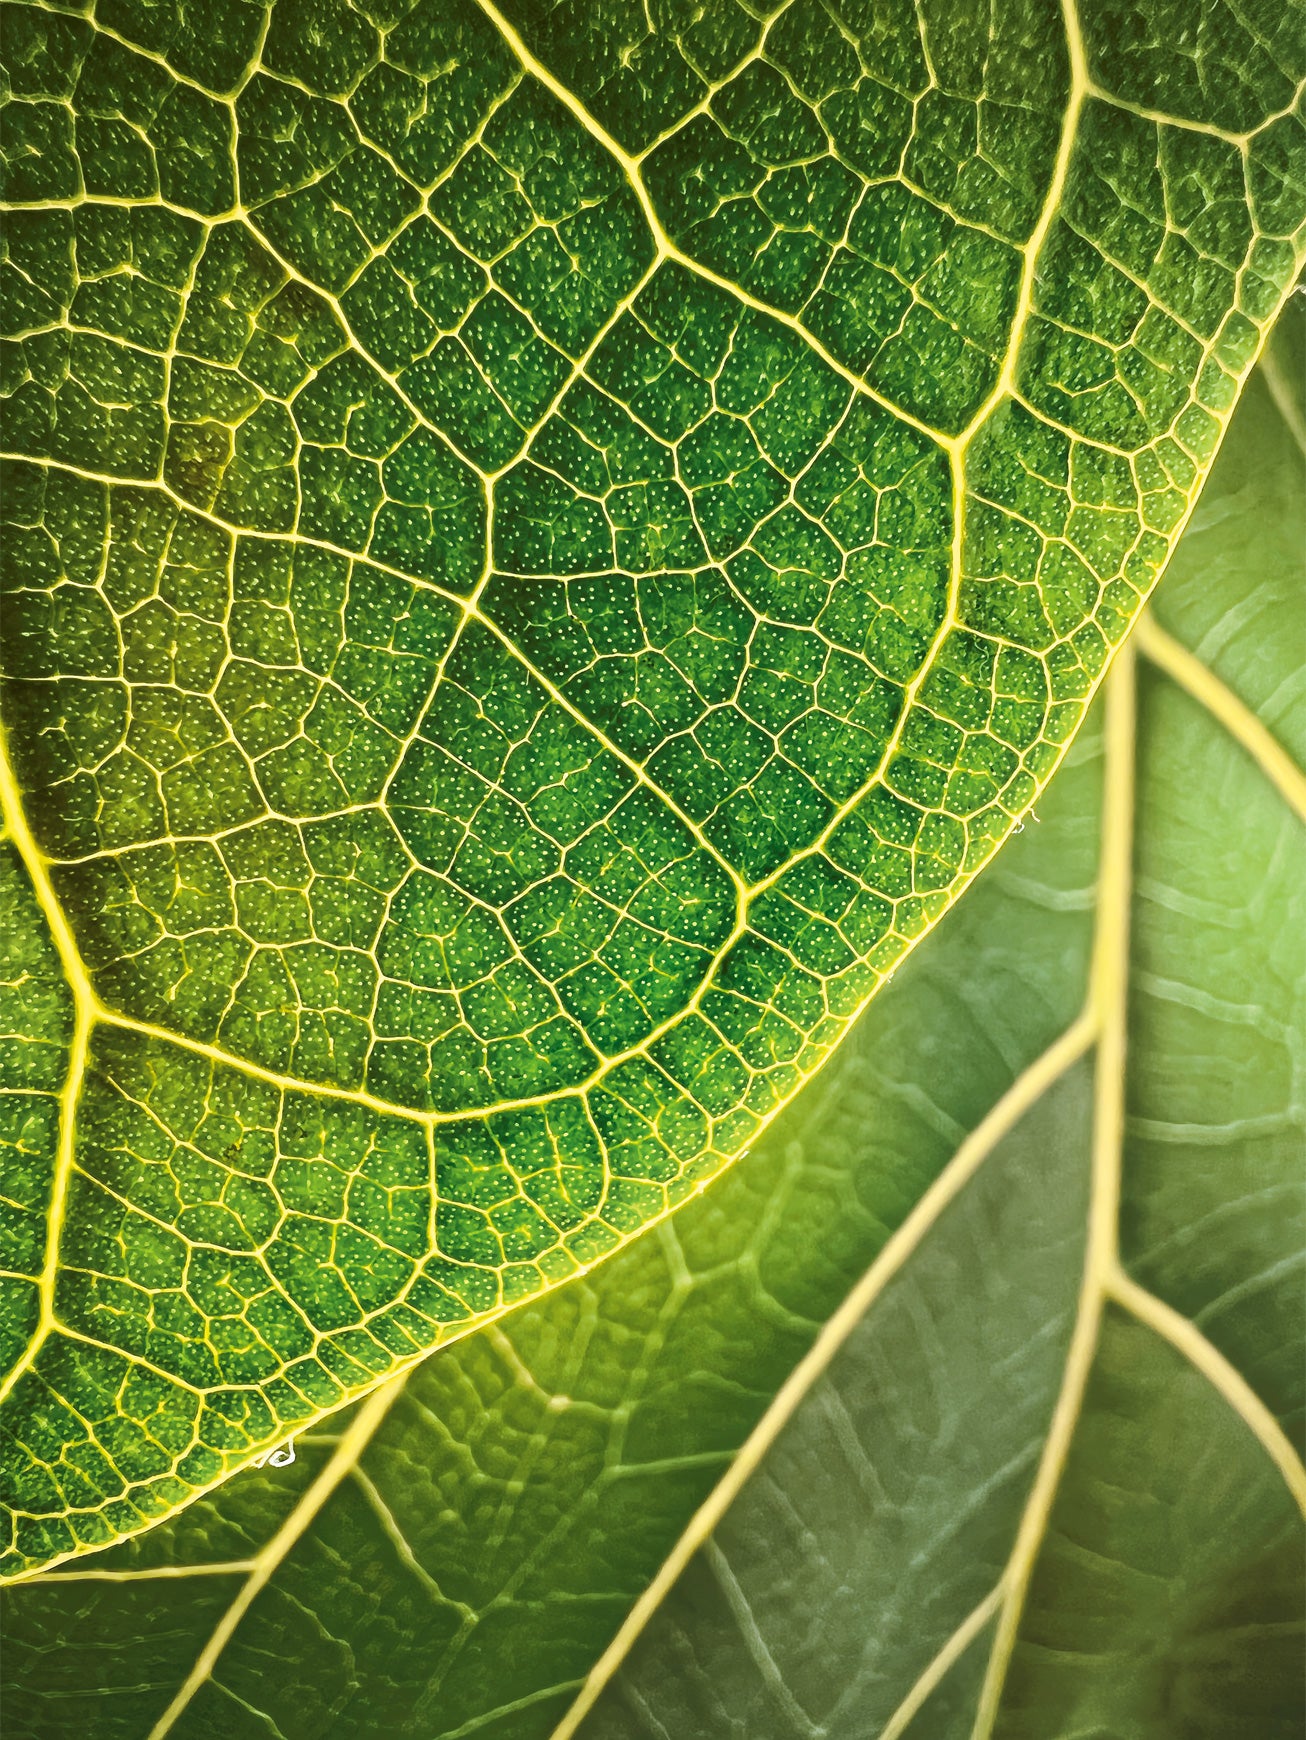 light passes through the veins of a fiddle leaf for the apple shot on iphone macro challenge 